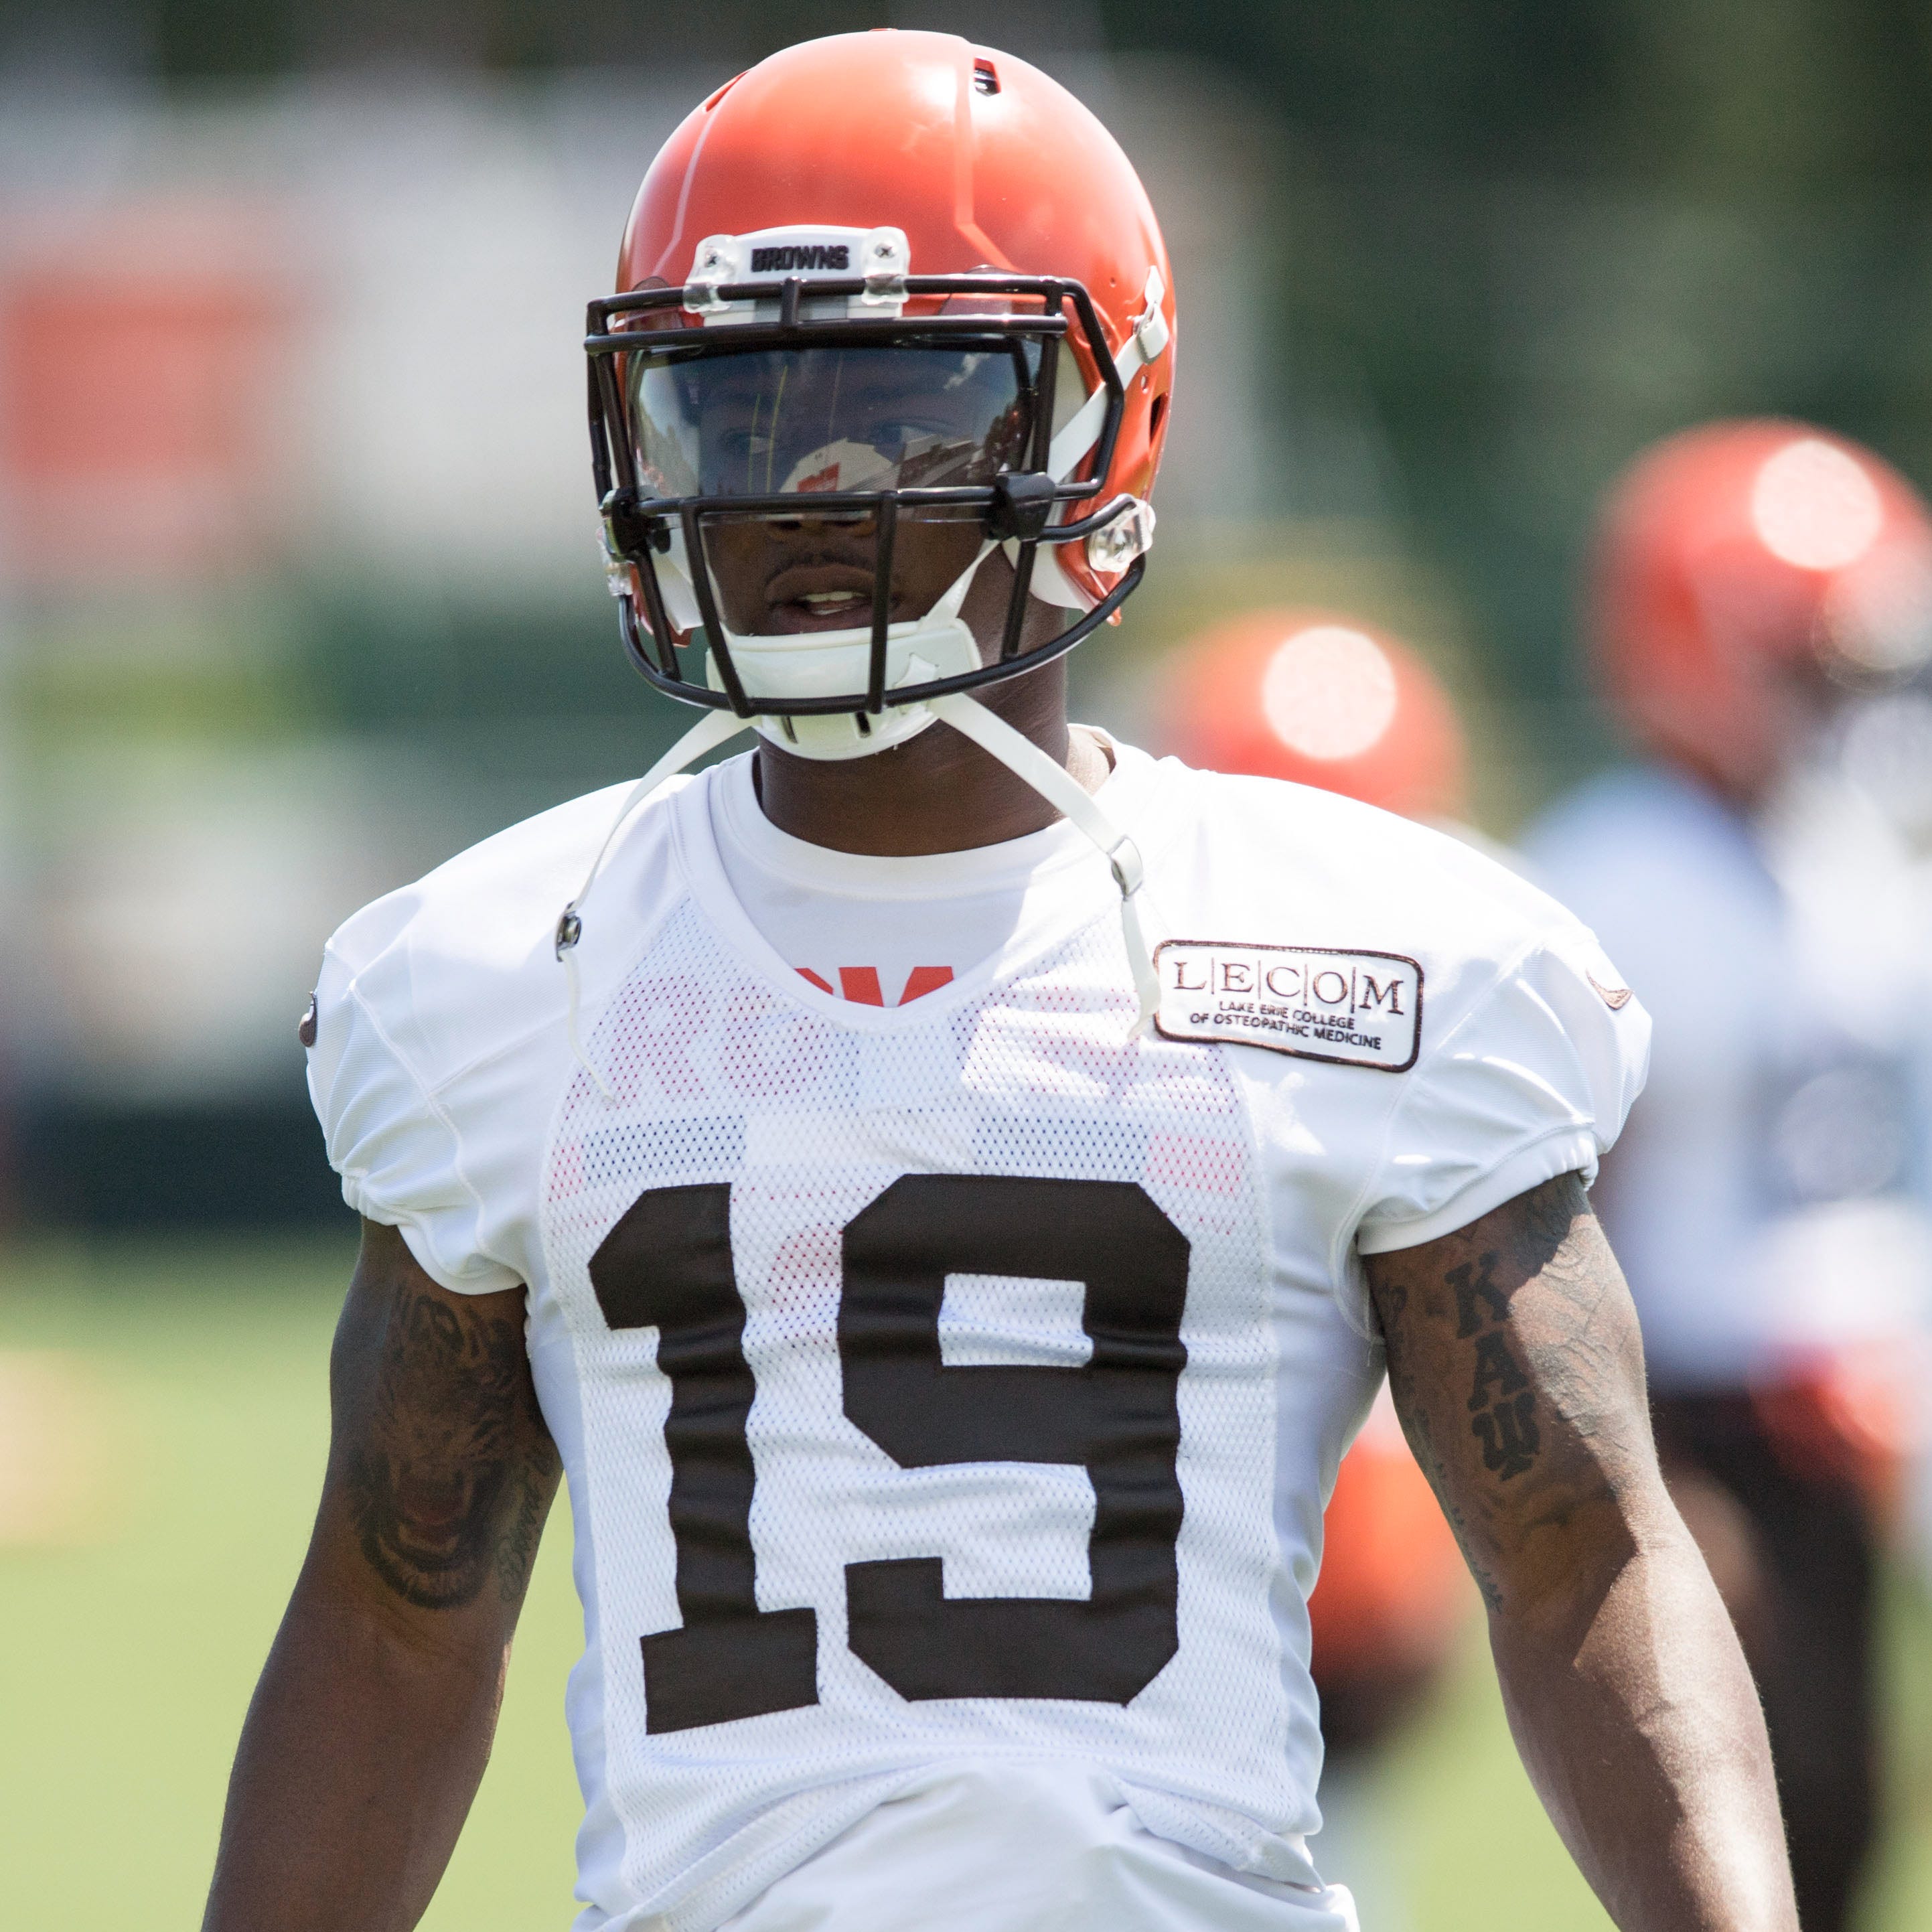 Corey Coleman was traded to the Bills on Aug. 5.